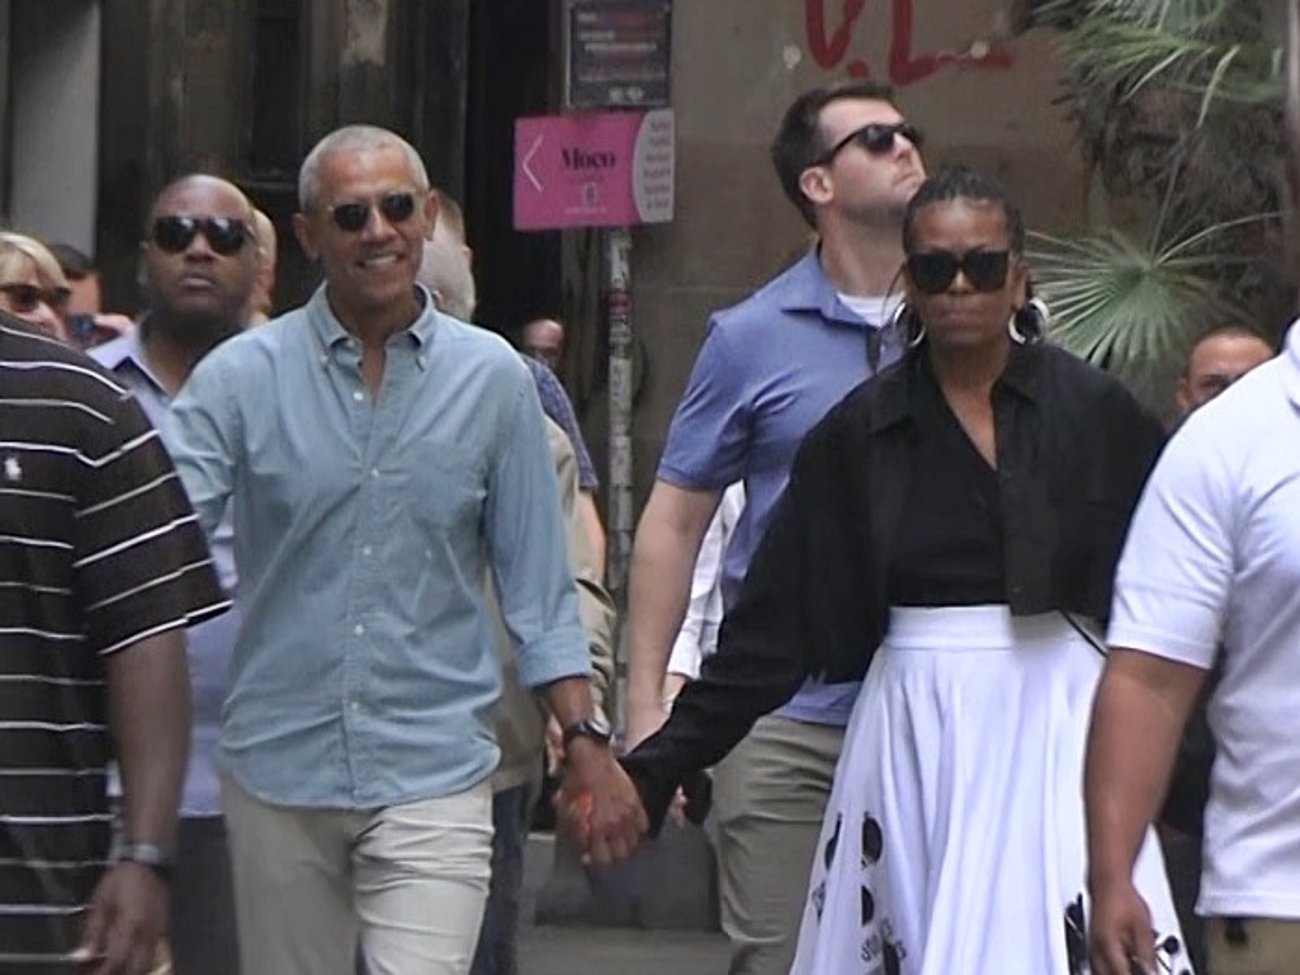 Barcelona witnesses the love walk of Barack and Michelle Obama